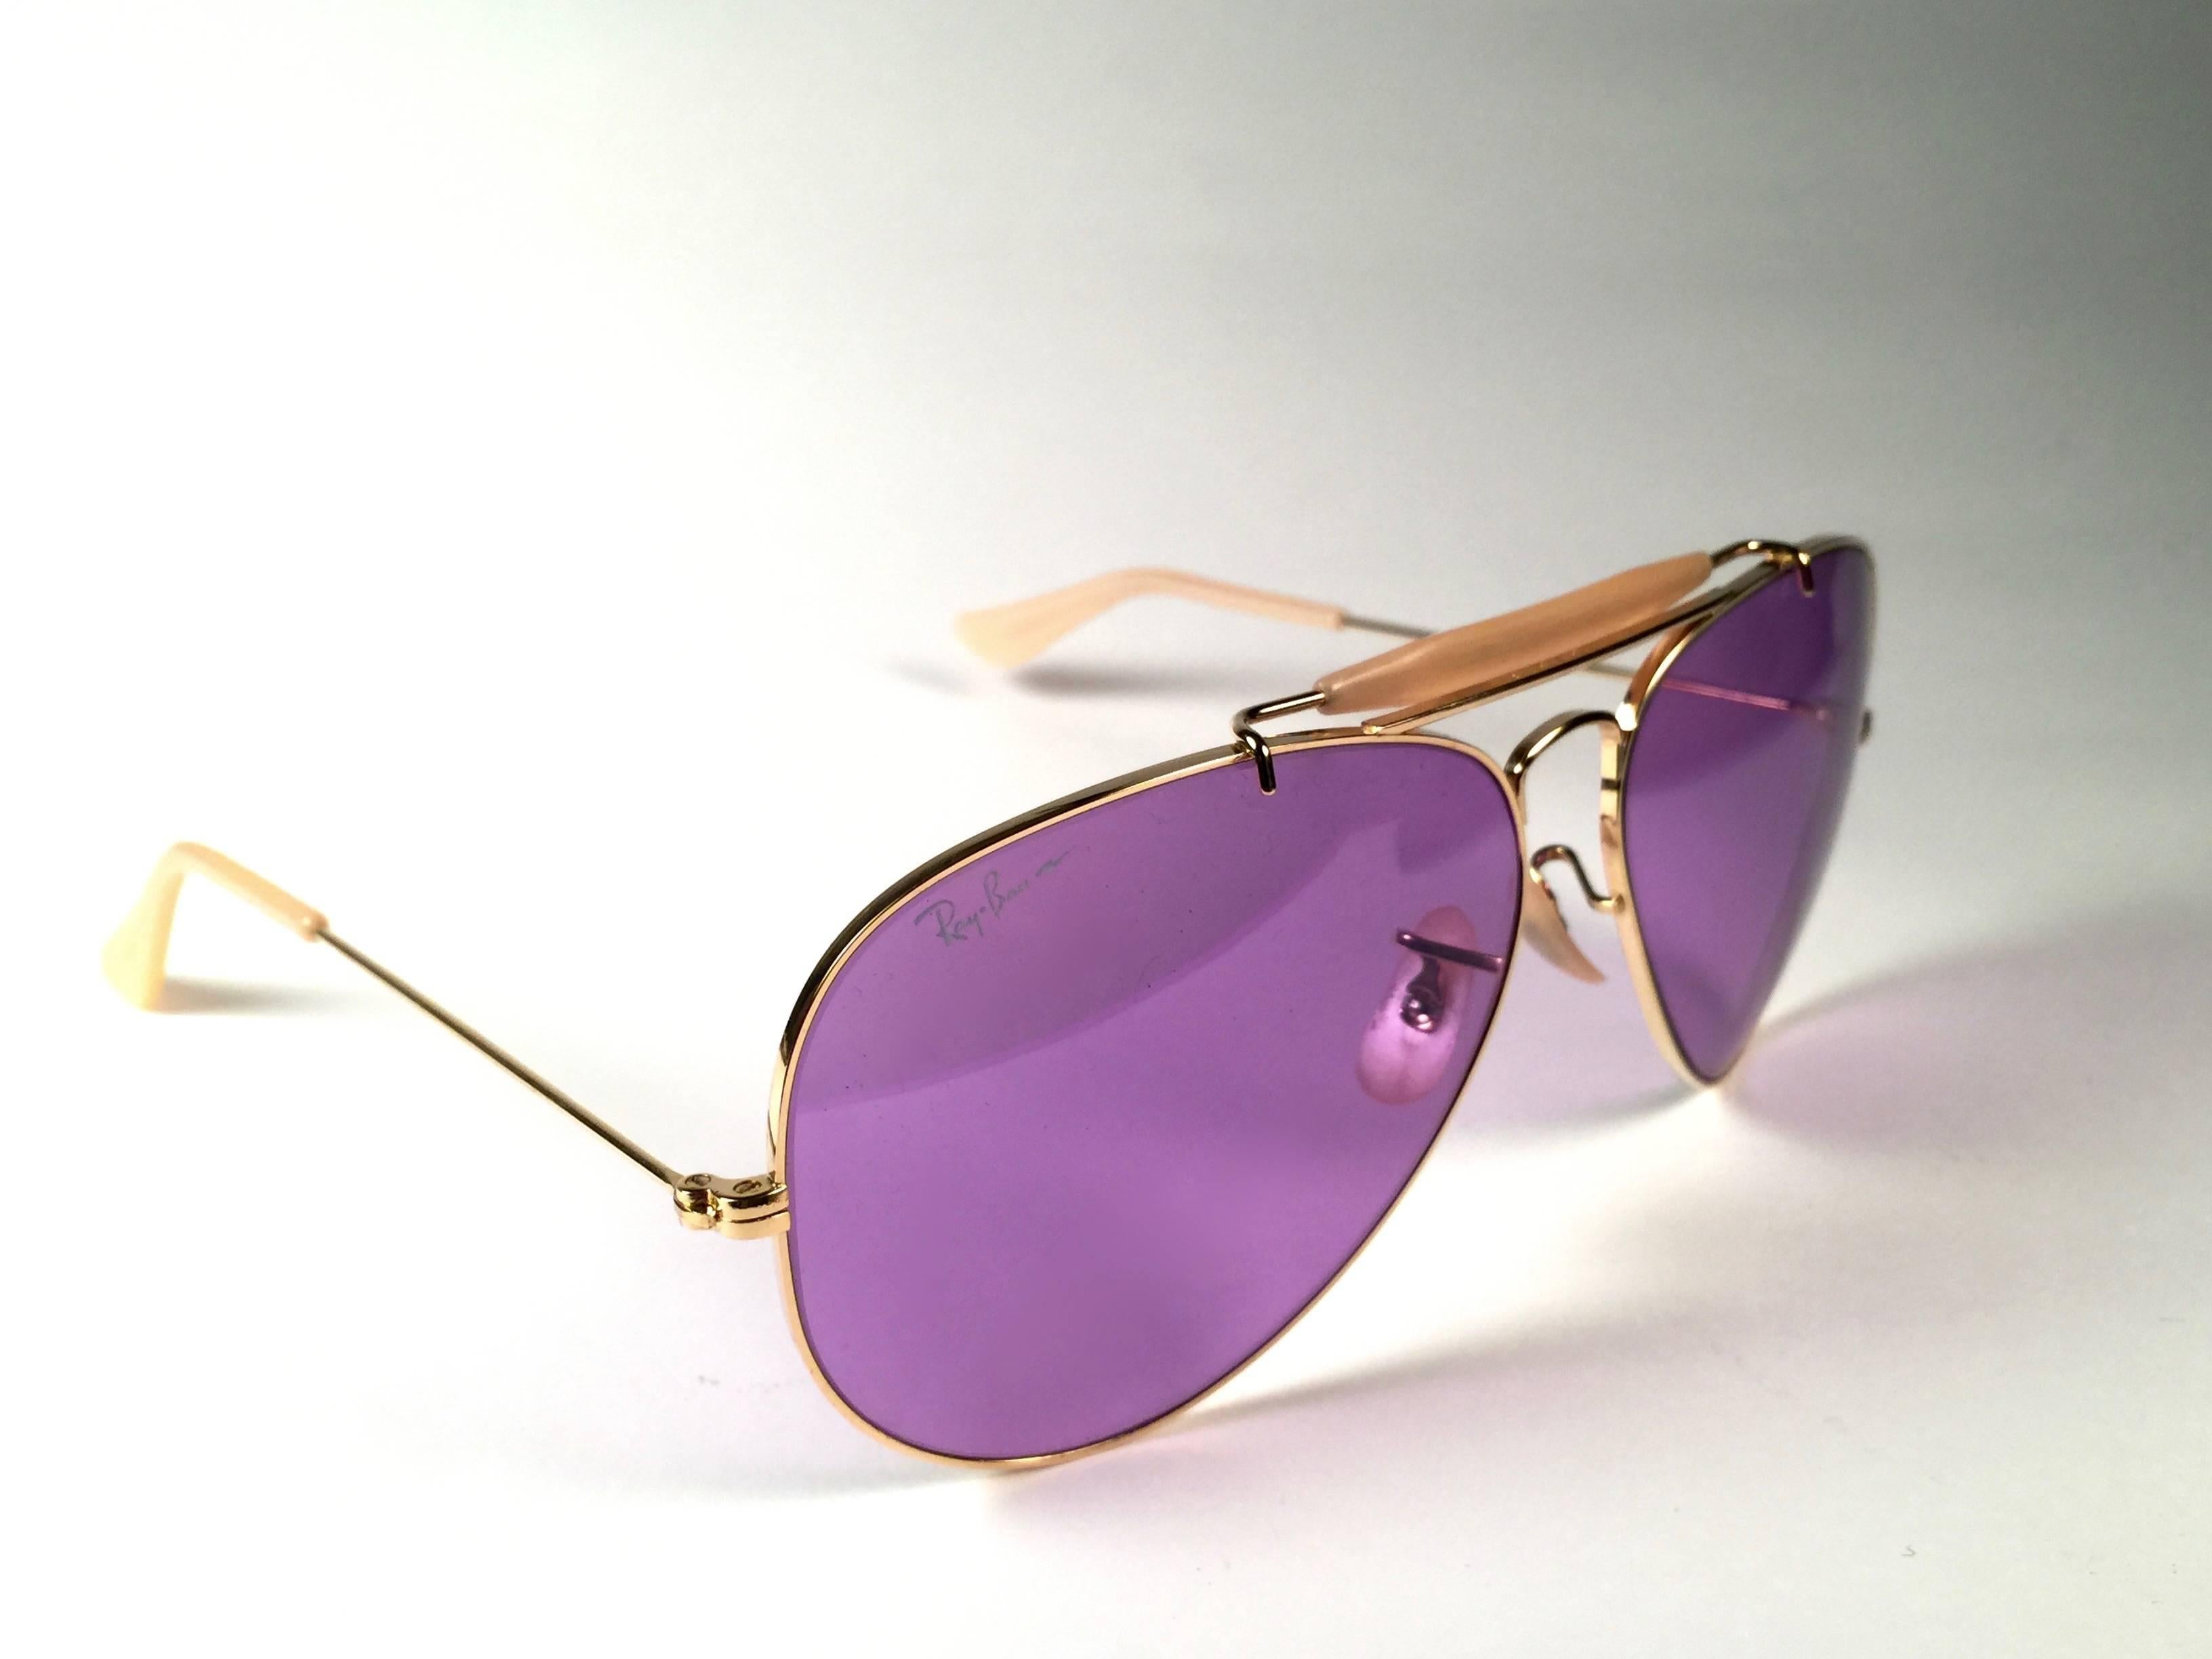 New, rare and sought after Vintage Ray Ban Purple Chromax. 
62Mm outdoorsman gold frame holding a pair of purple Chromax B&L etched lenses.

New, never worn or displayed, this item is a superb find.
It may have minor sign of wear due to storage.